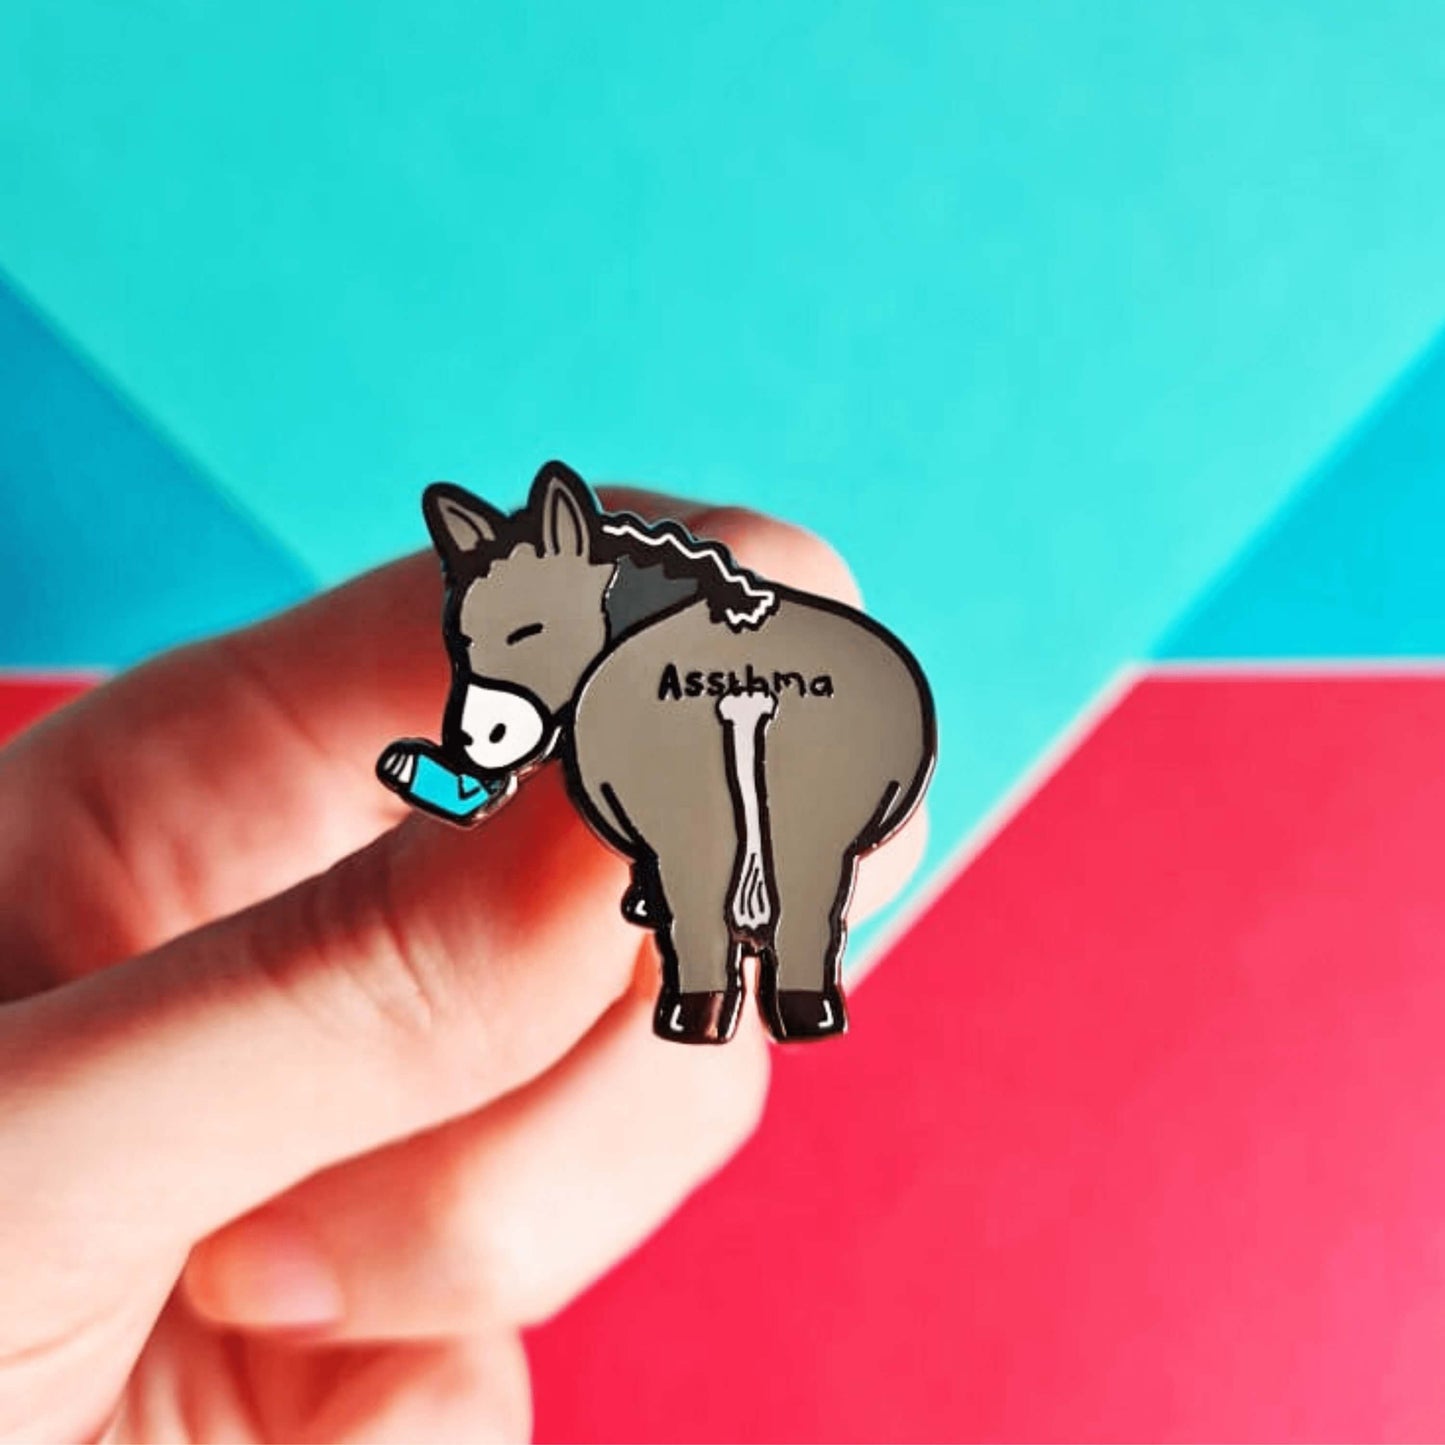 Assthma Enamel Pin - Asthma being held over a blue, green and red background. A grey donkey ass showing its behind with a blue asthma pump in its mouth and the word Assthma across its behind. The pin is designed to raise awareness for asthma.